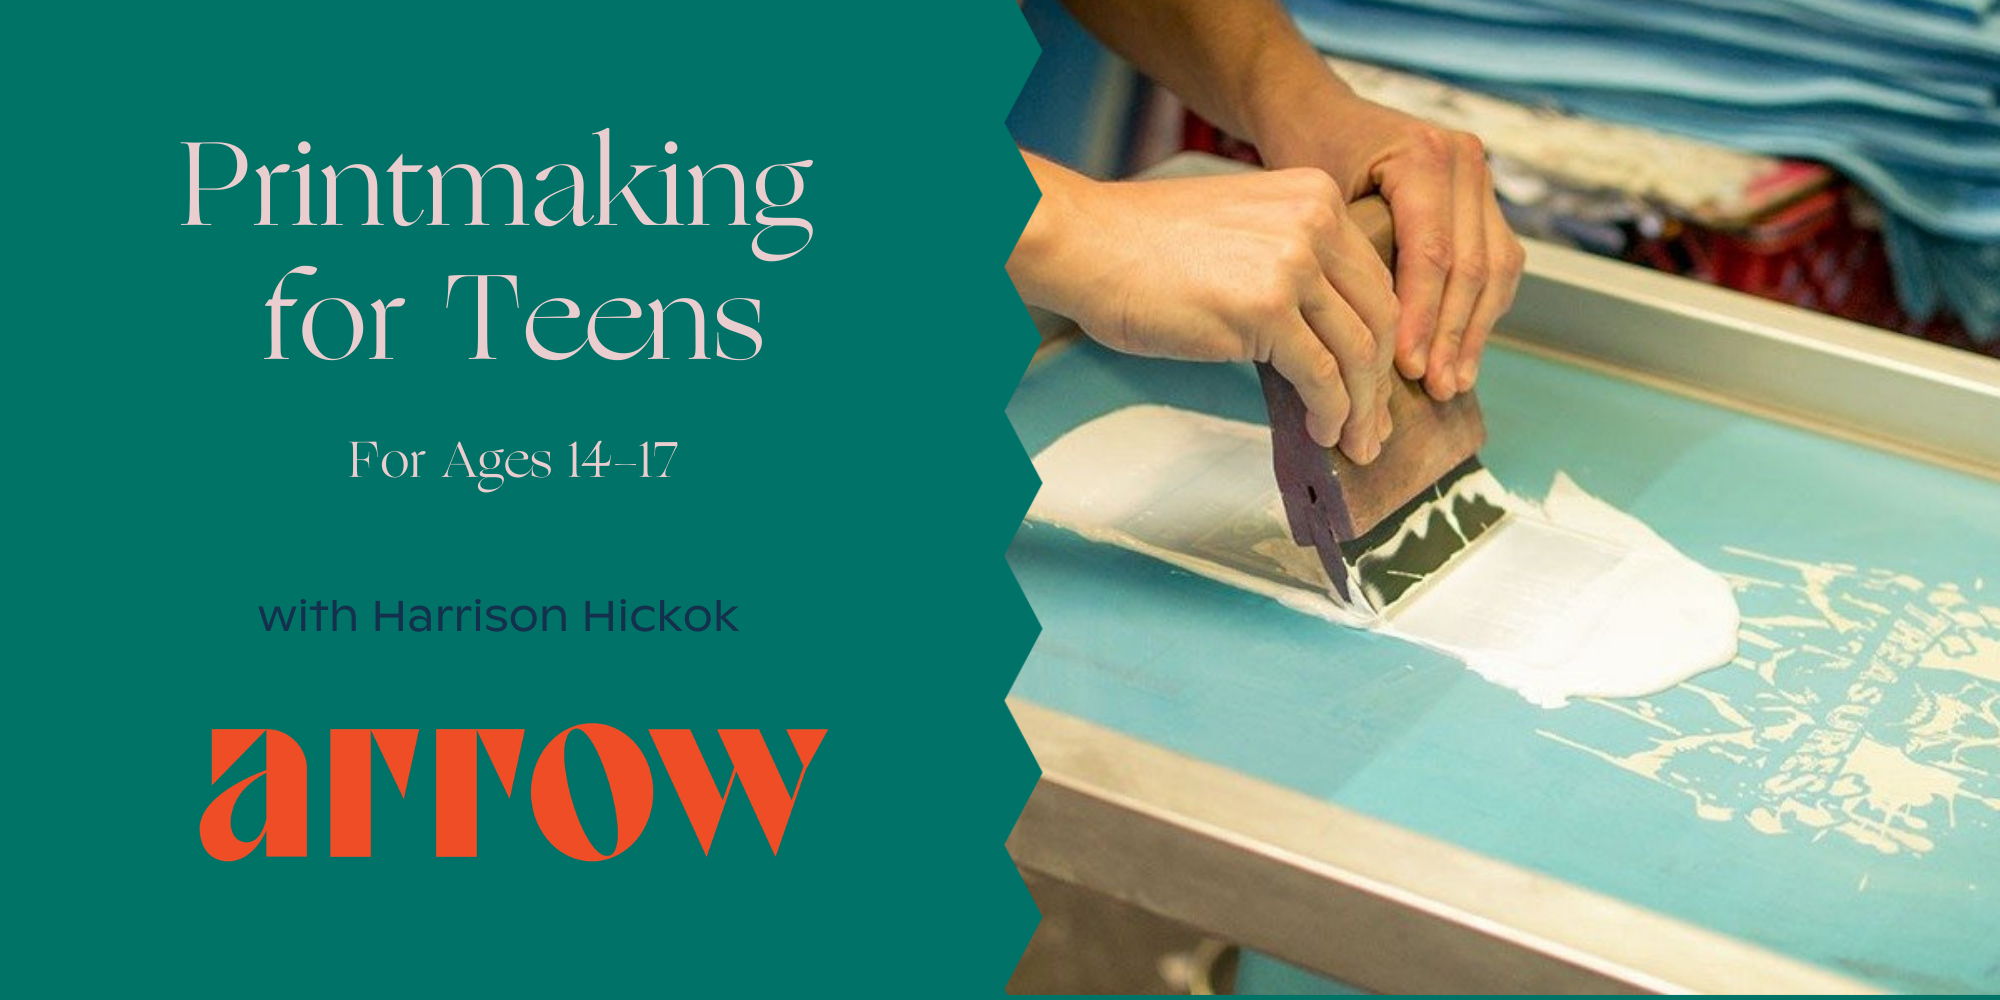 Printmaking for Teens promotional image